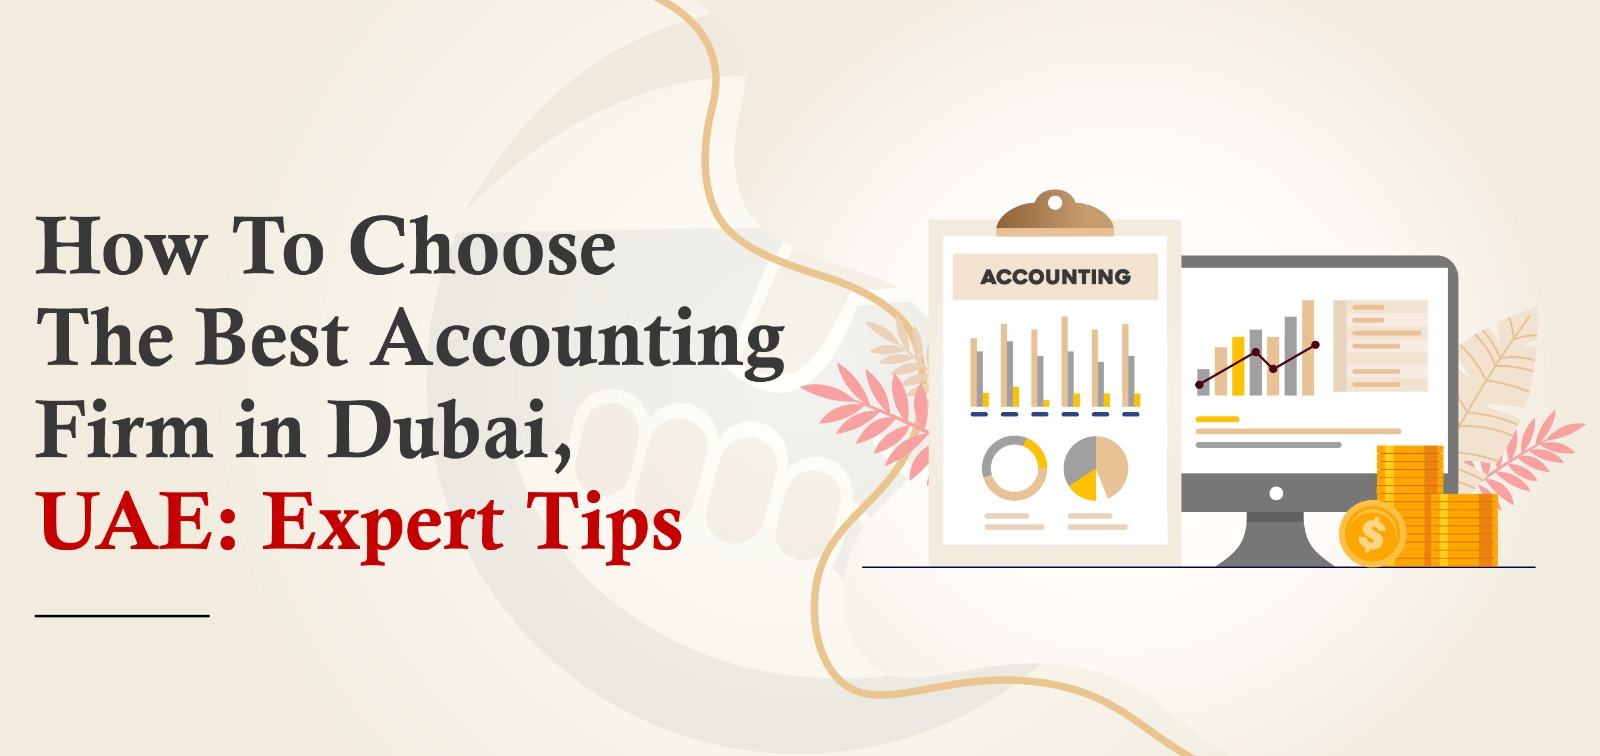 how-to-choose-the-best-accounting-firm-in-dubai-uae